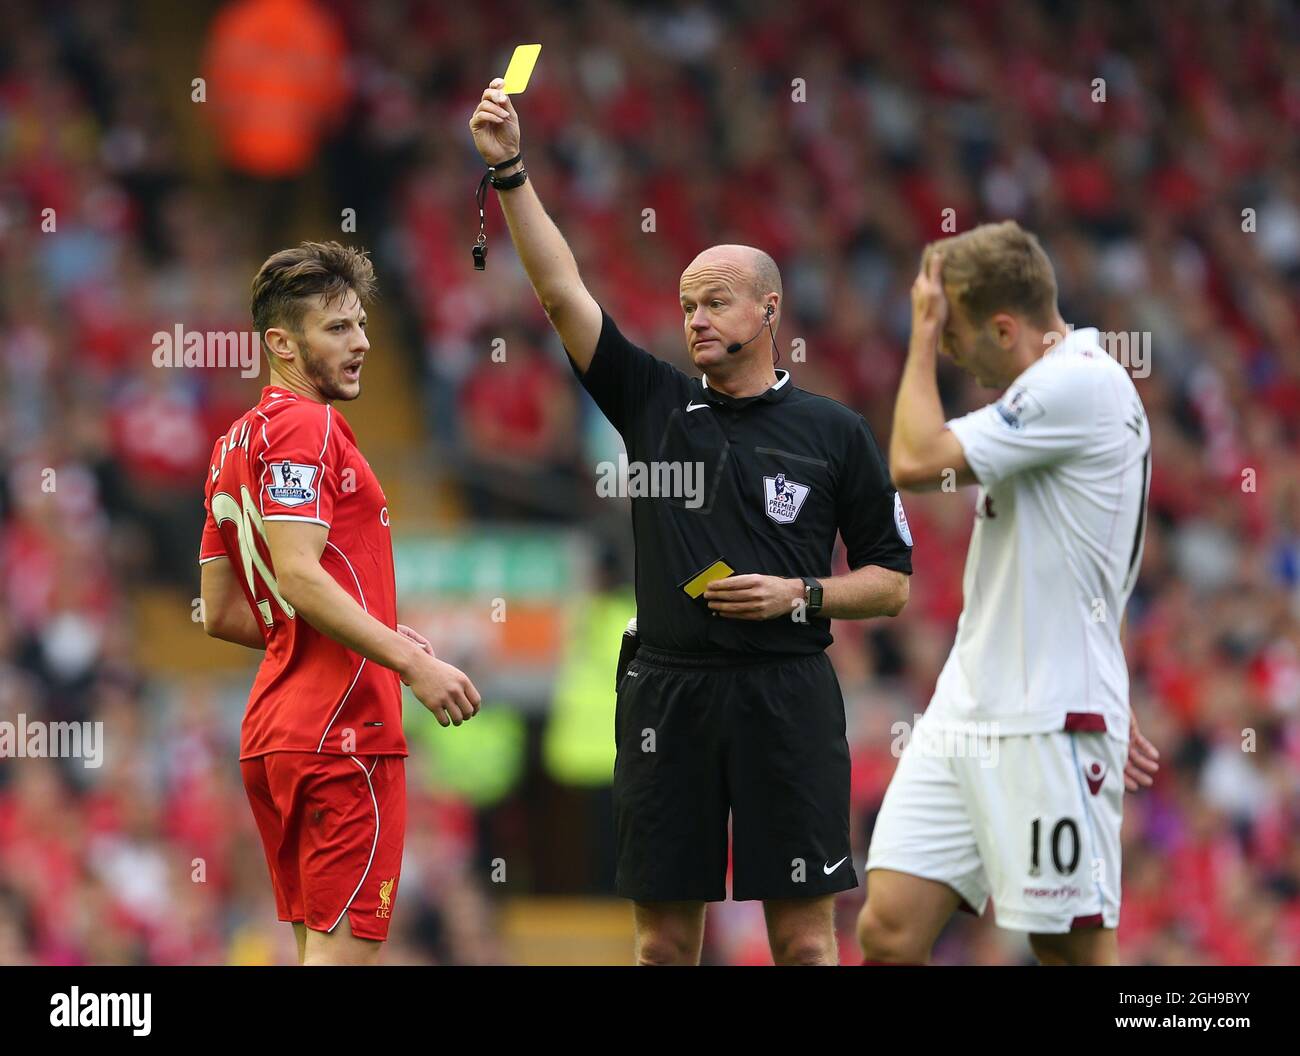 Adam Lallana of Liverpool receives a yellow card during the English Premier League soccer match at Anfield in Liverpool, northern England September 13, 2014. Stock Photo